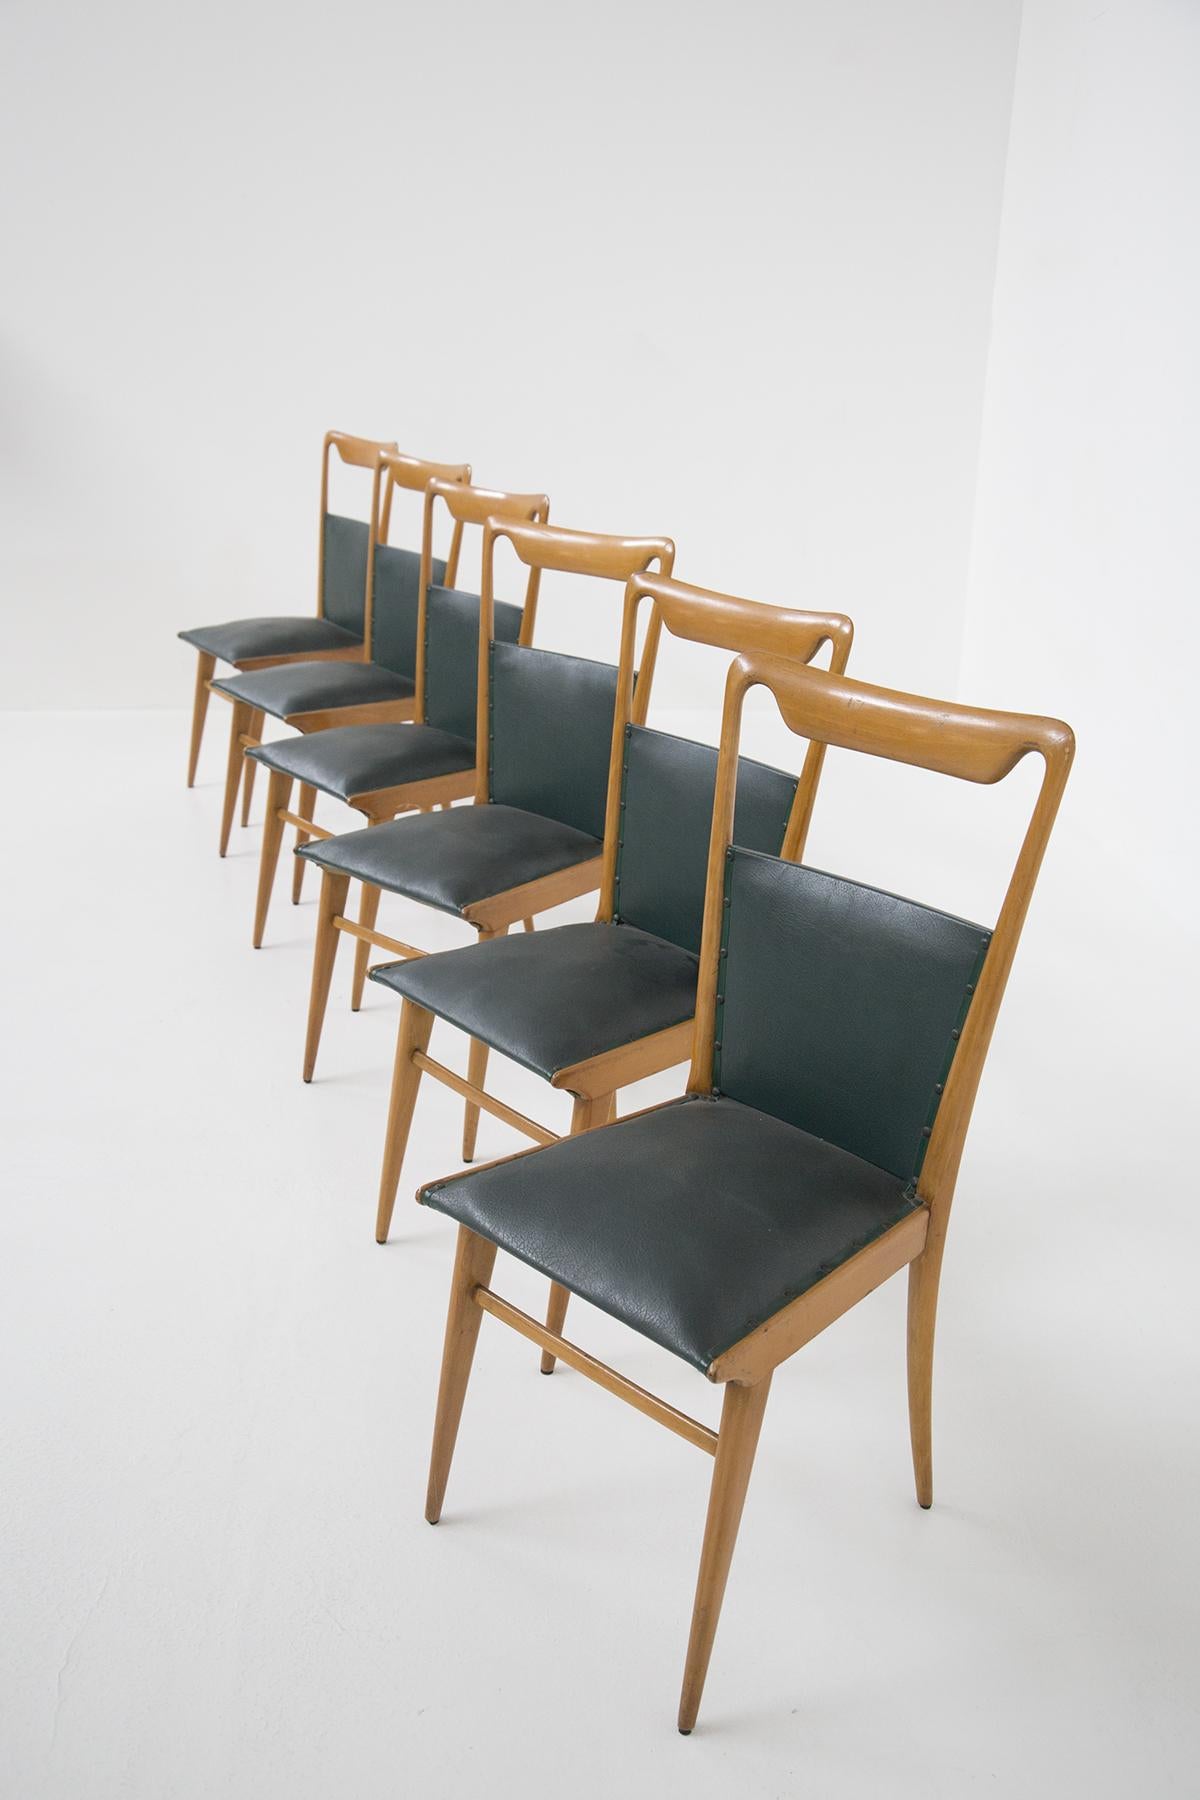 Lovely set composed of six wooden chairs designed in the 50's, of fine Italian manufacture.
The structure of the chairs is linear, with four supporting legs, with a pointed shape, while the back is straight with a slightly curved cut of the